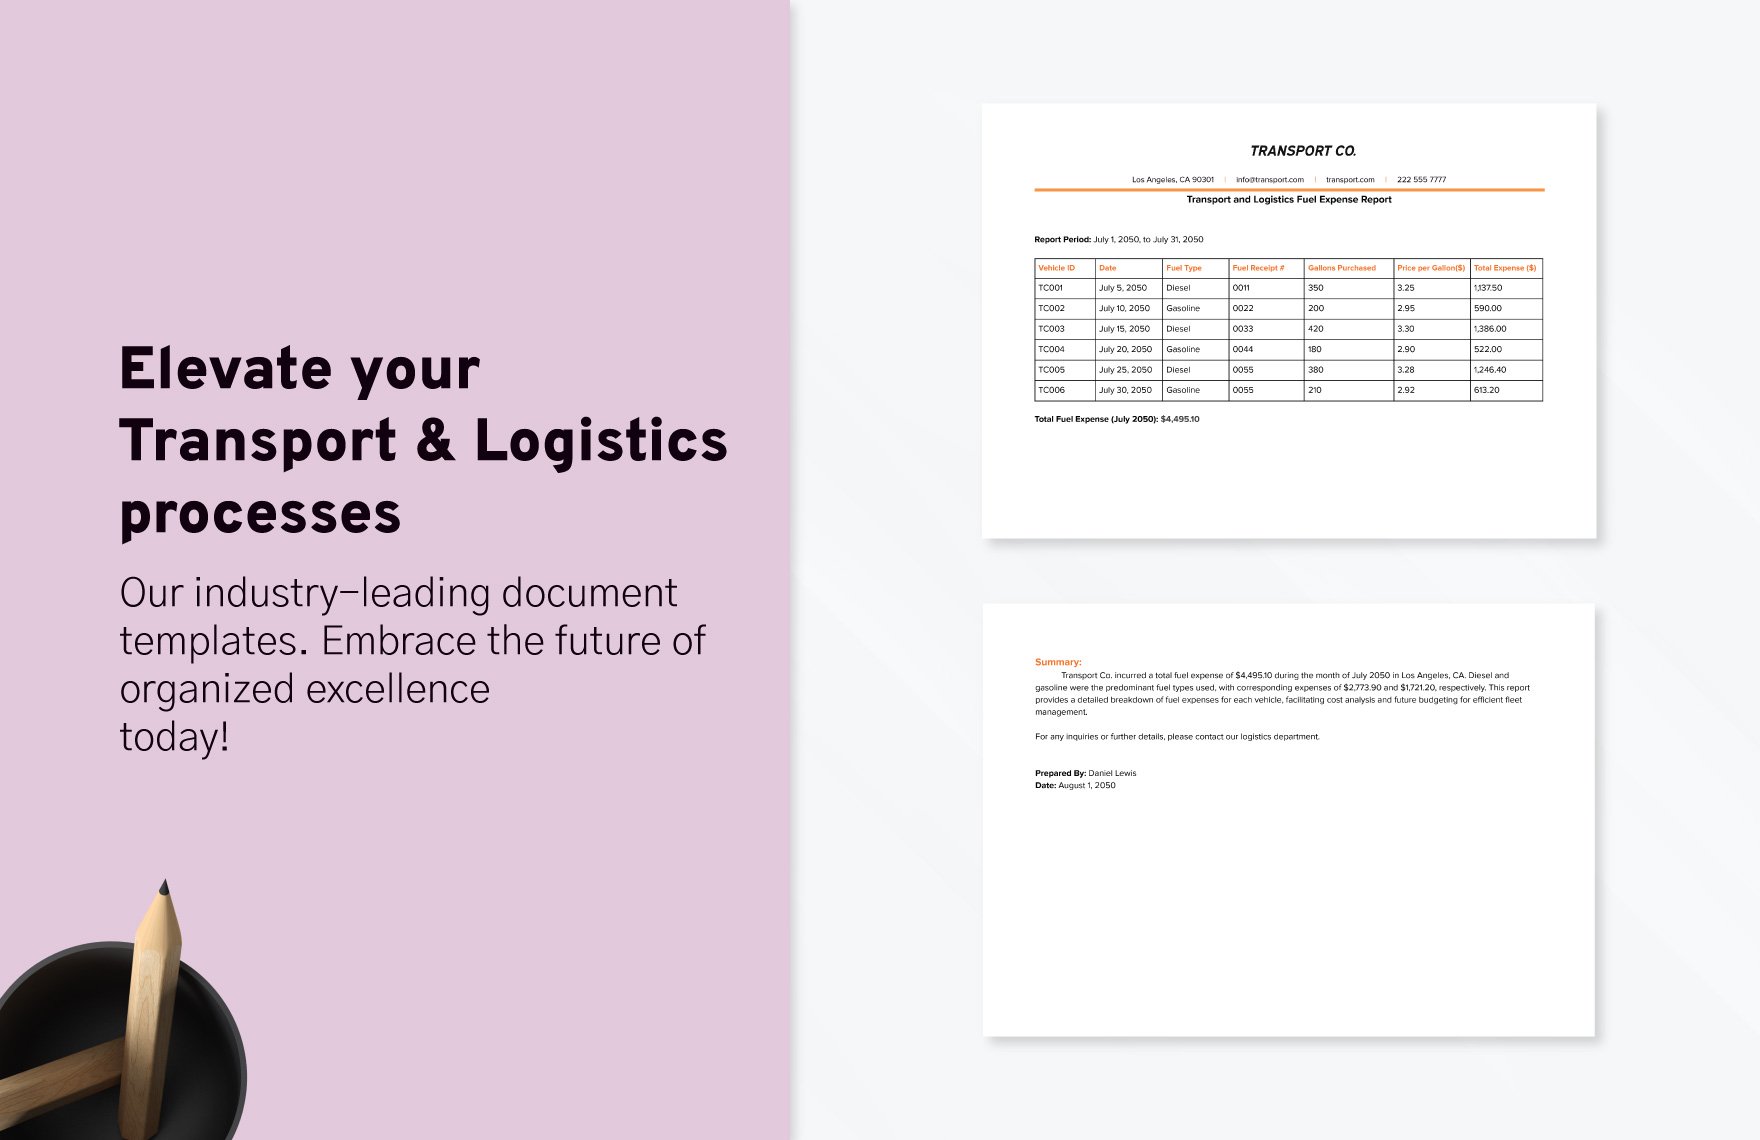 Transport and Logistics Fuel Expense Report Template